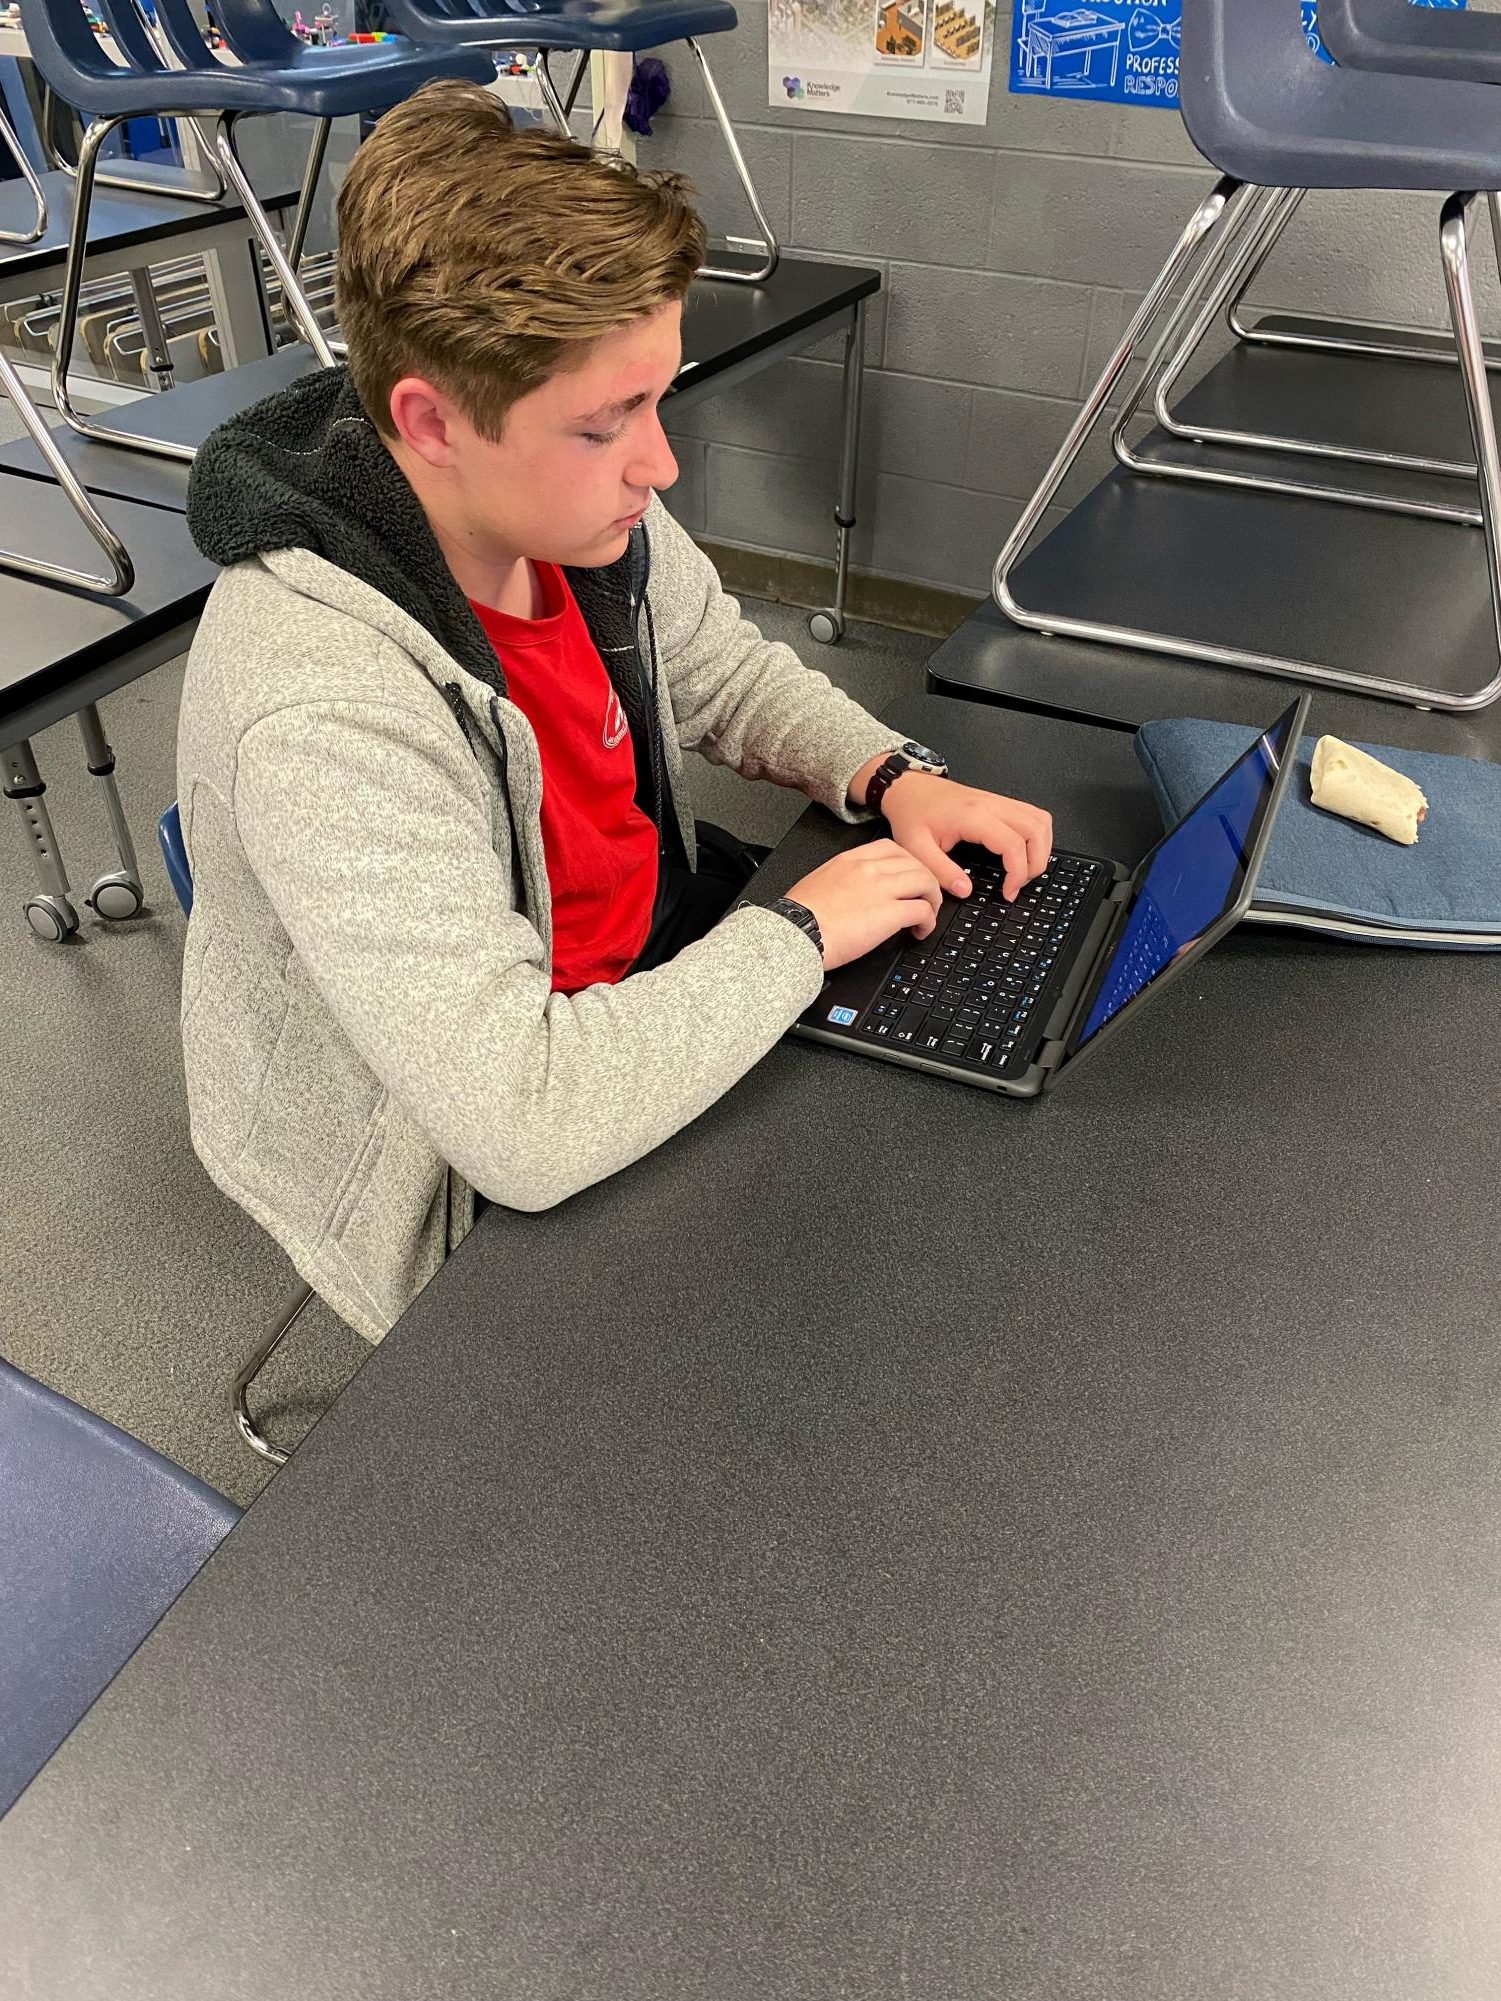 Sophomore Wyatt Sullivan at Air Academy shows up to school early to demonstrate academic success. 